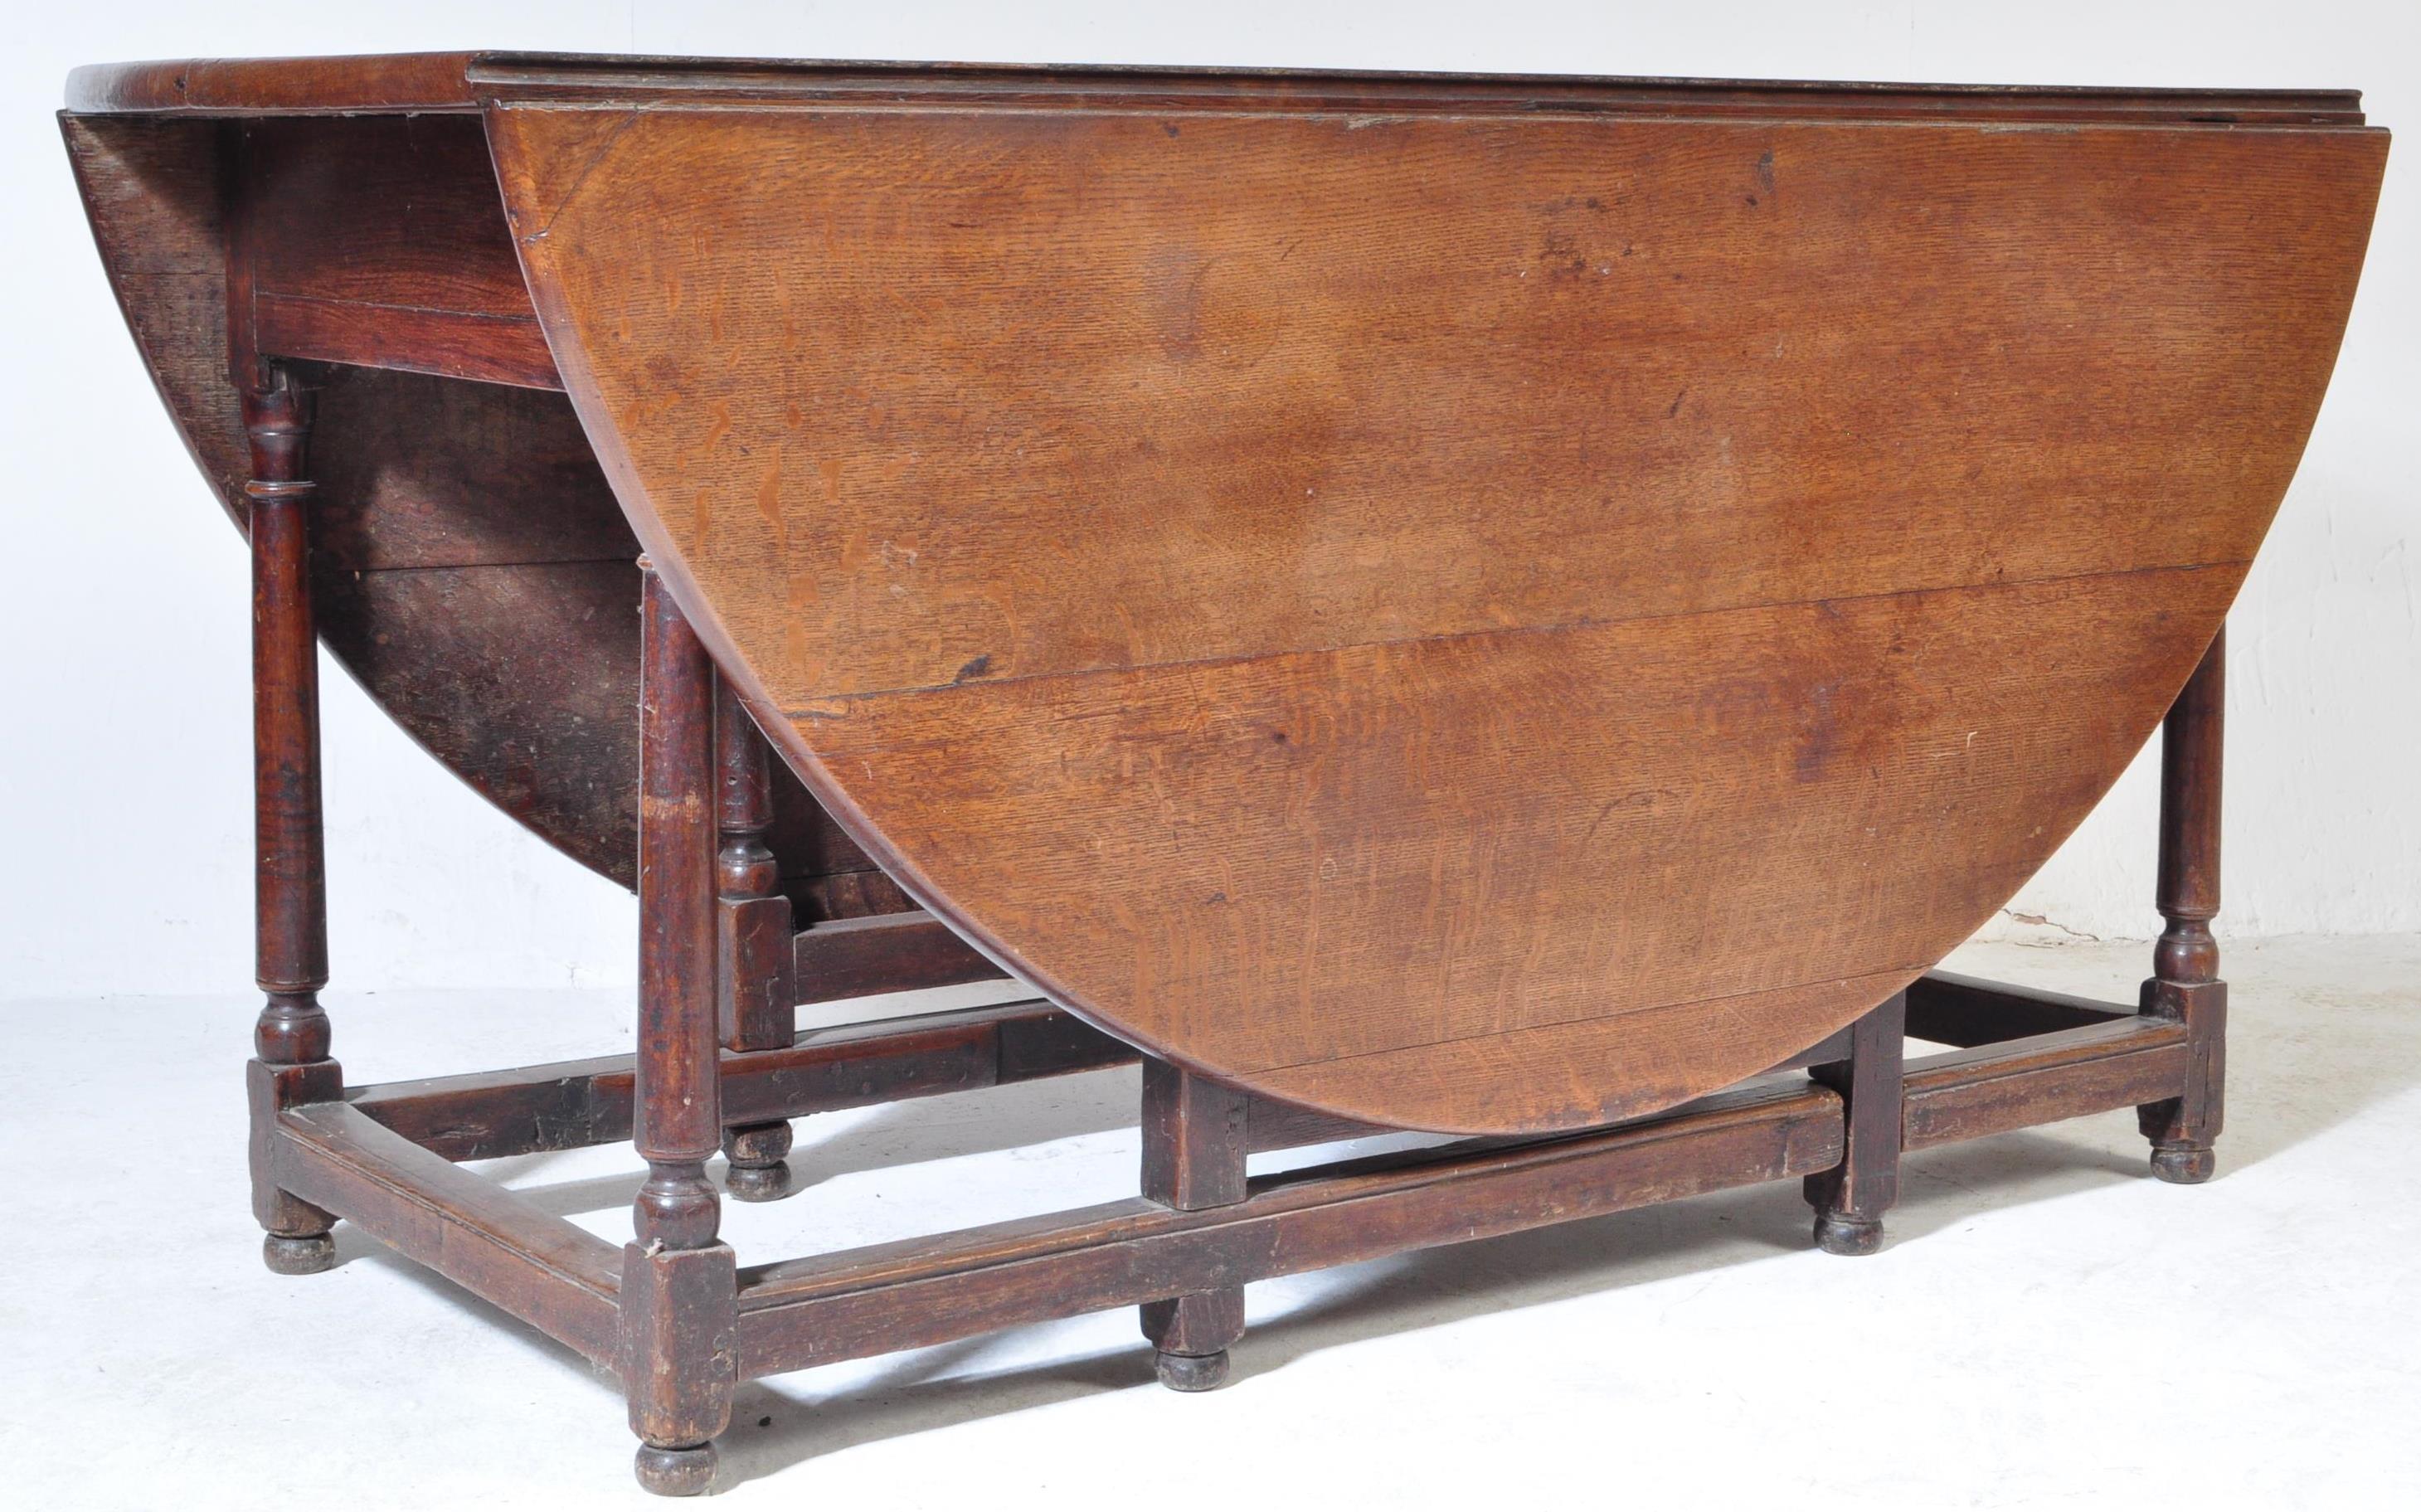 LARGE 19TH CENTURY FRENCH OAK DROP LEAF WAKE DINING TABLE